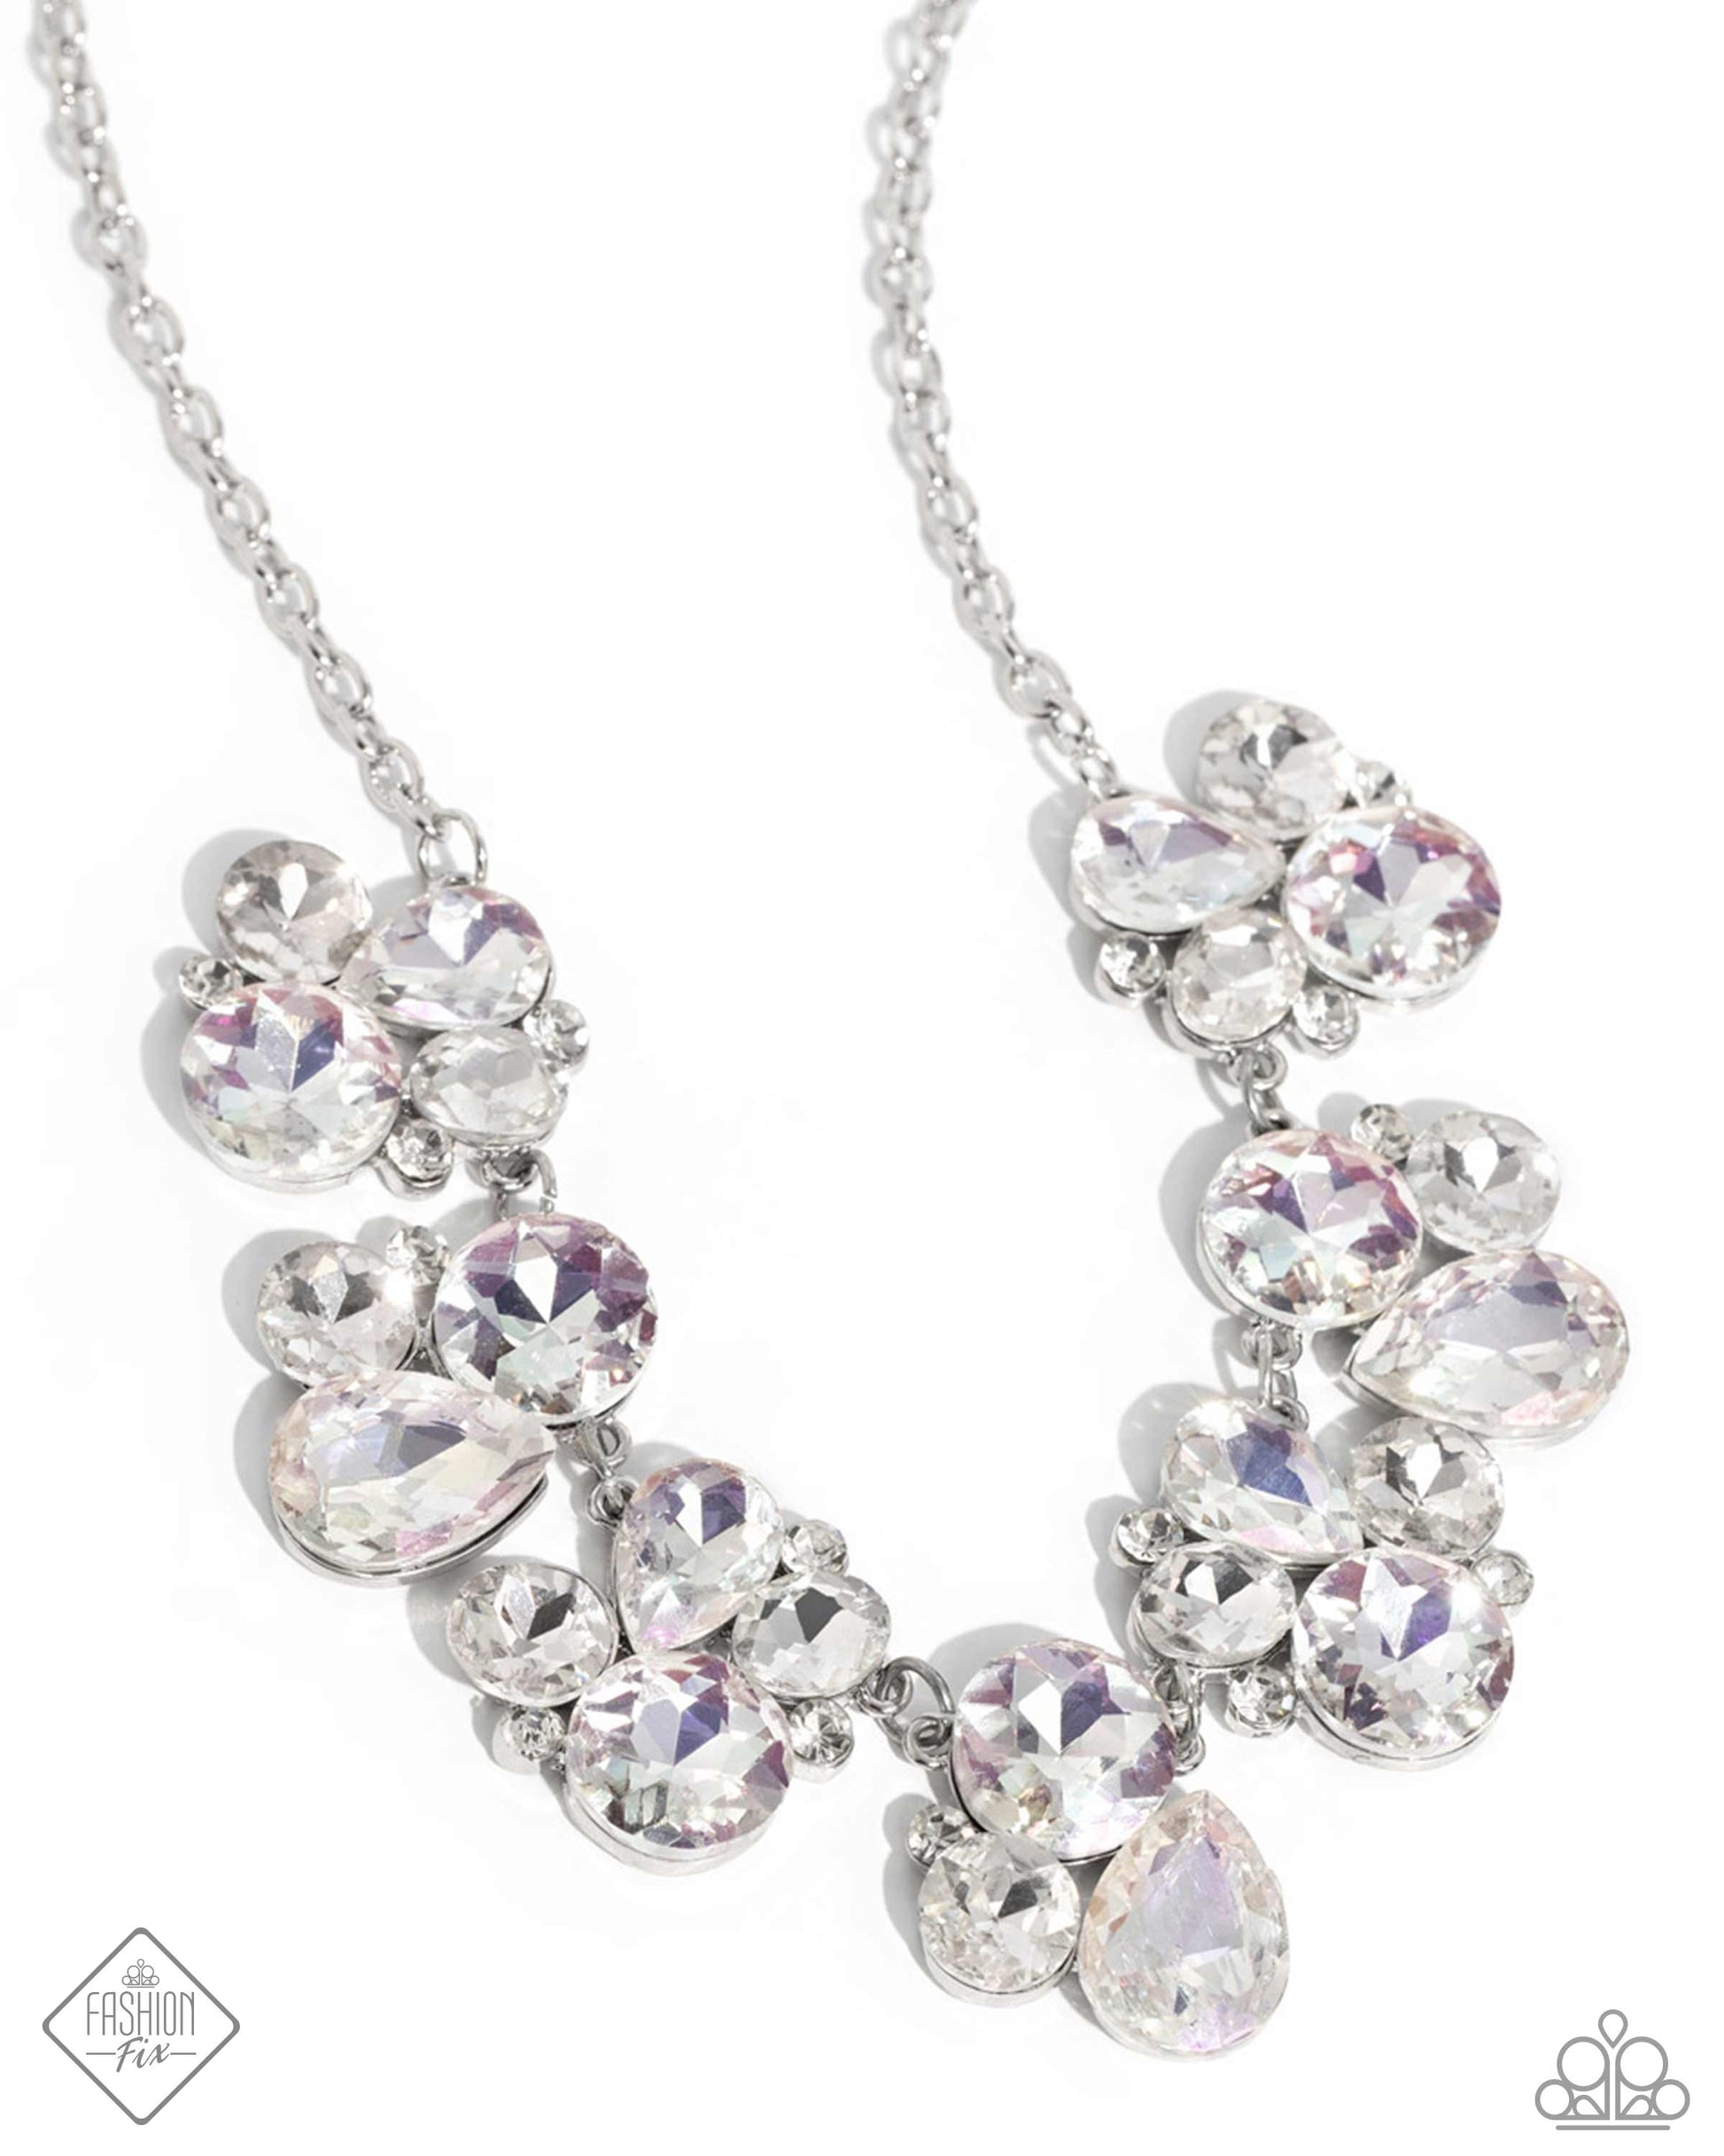 Fairytale Frost - white - Paparazzi necklace